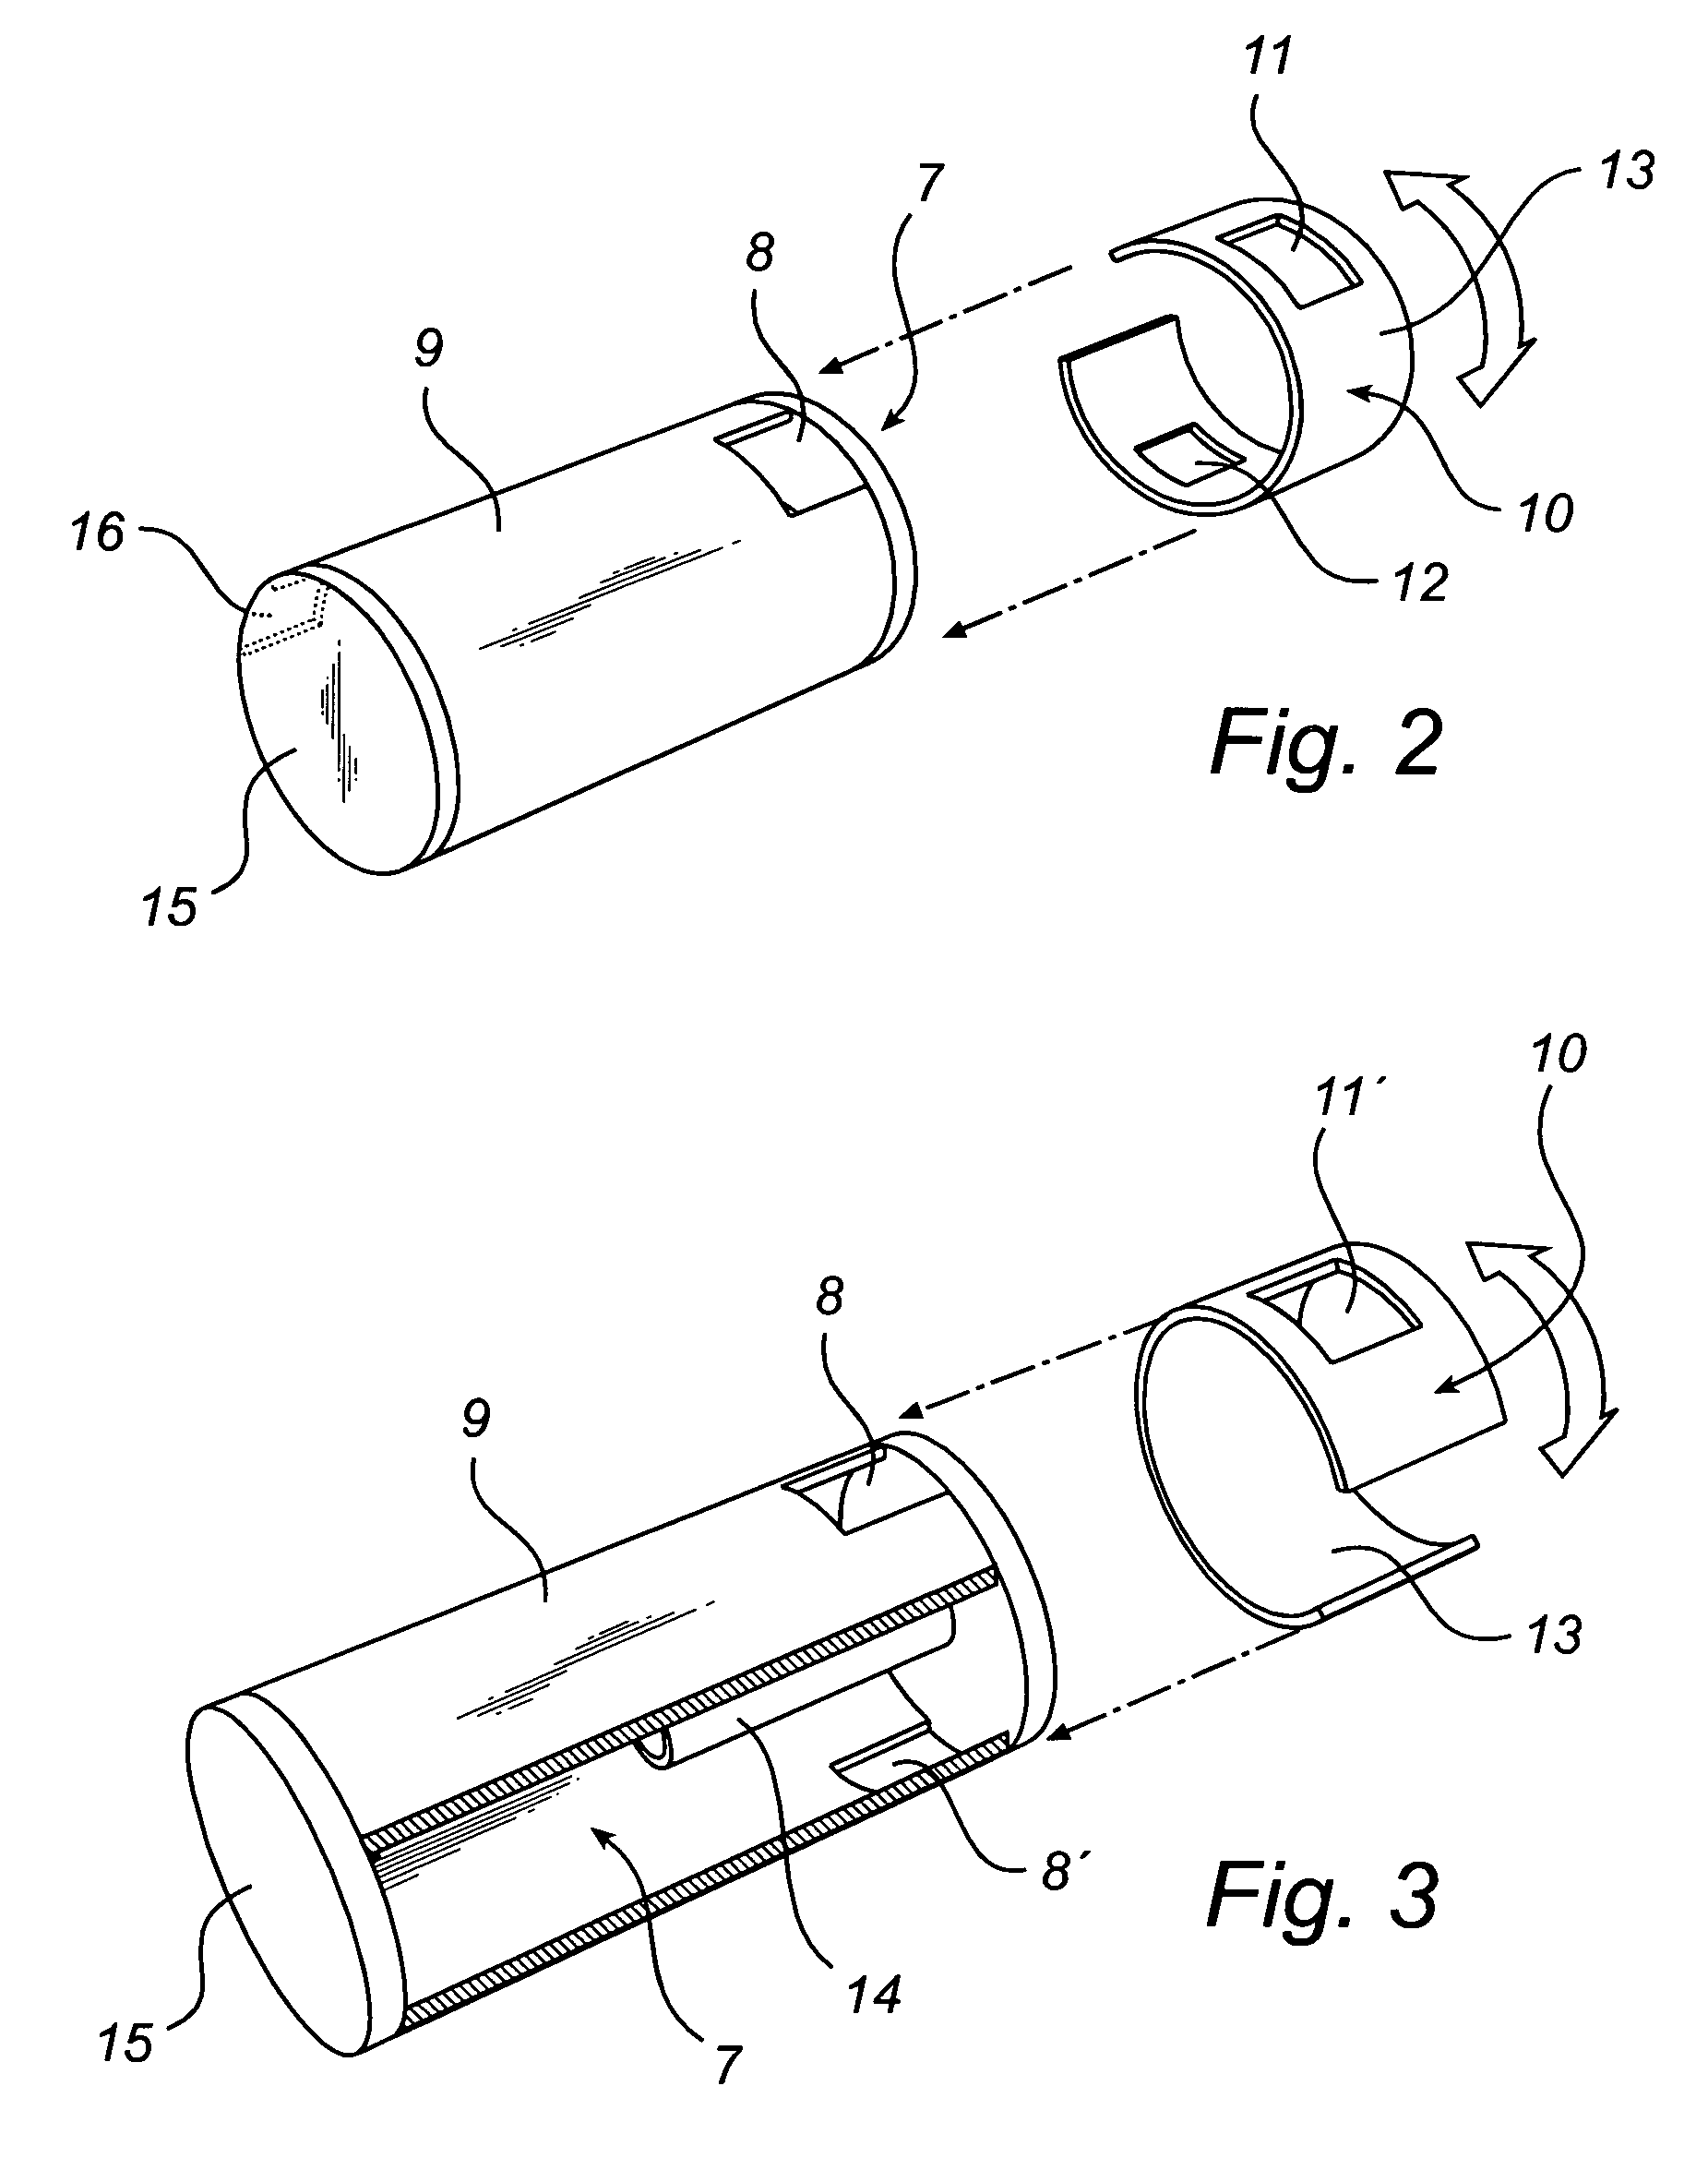 Cyclone-like separator for a vacuum cleaner